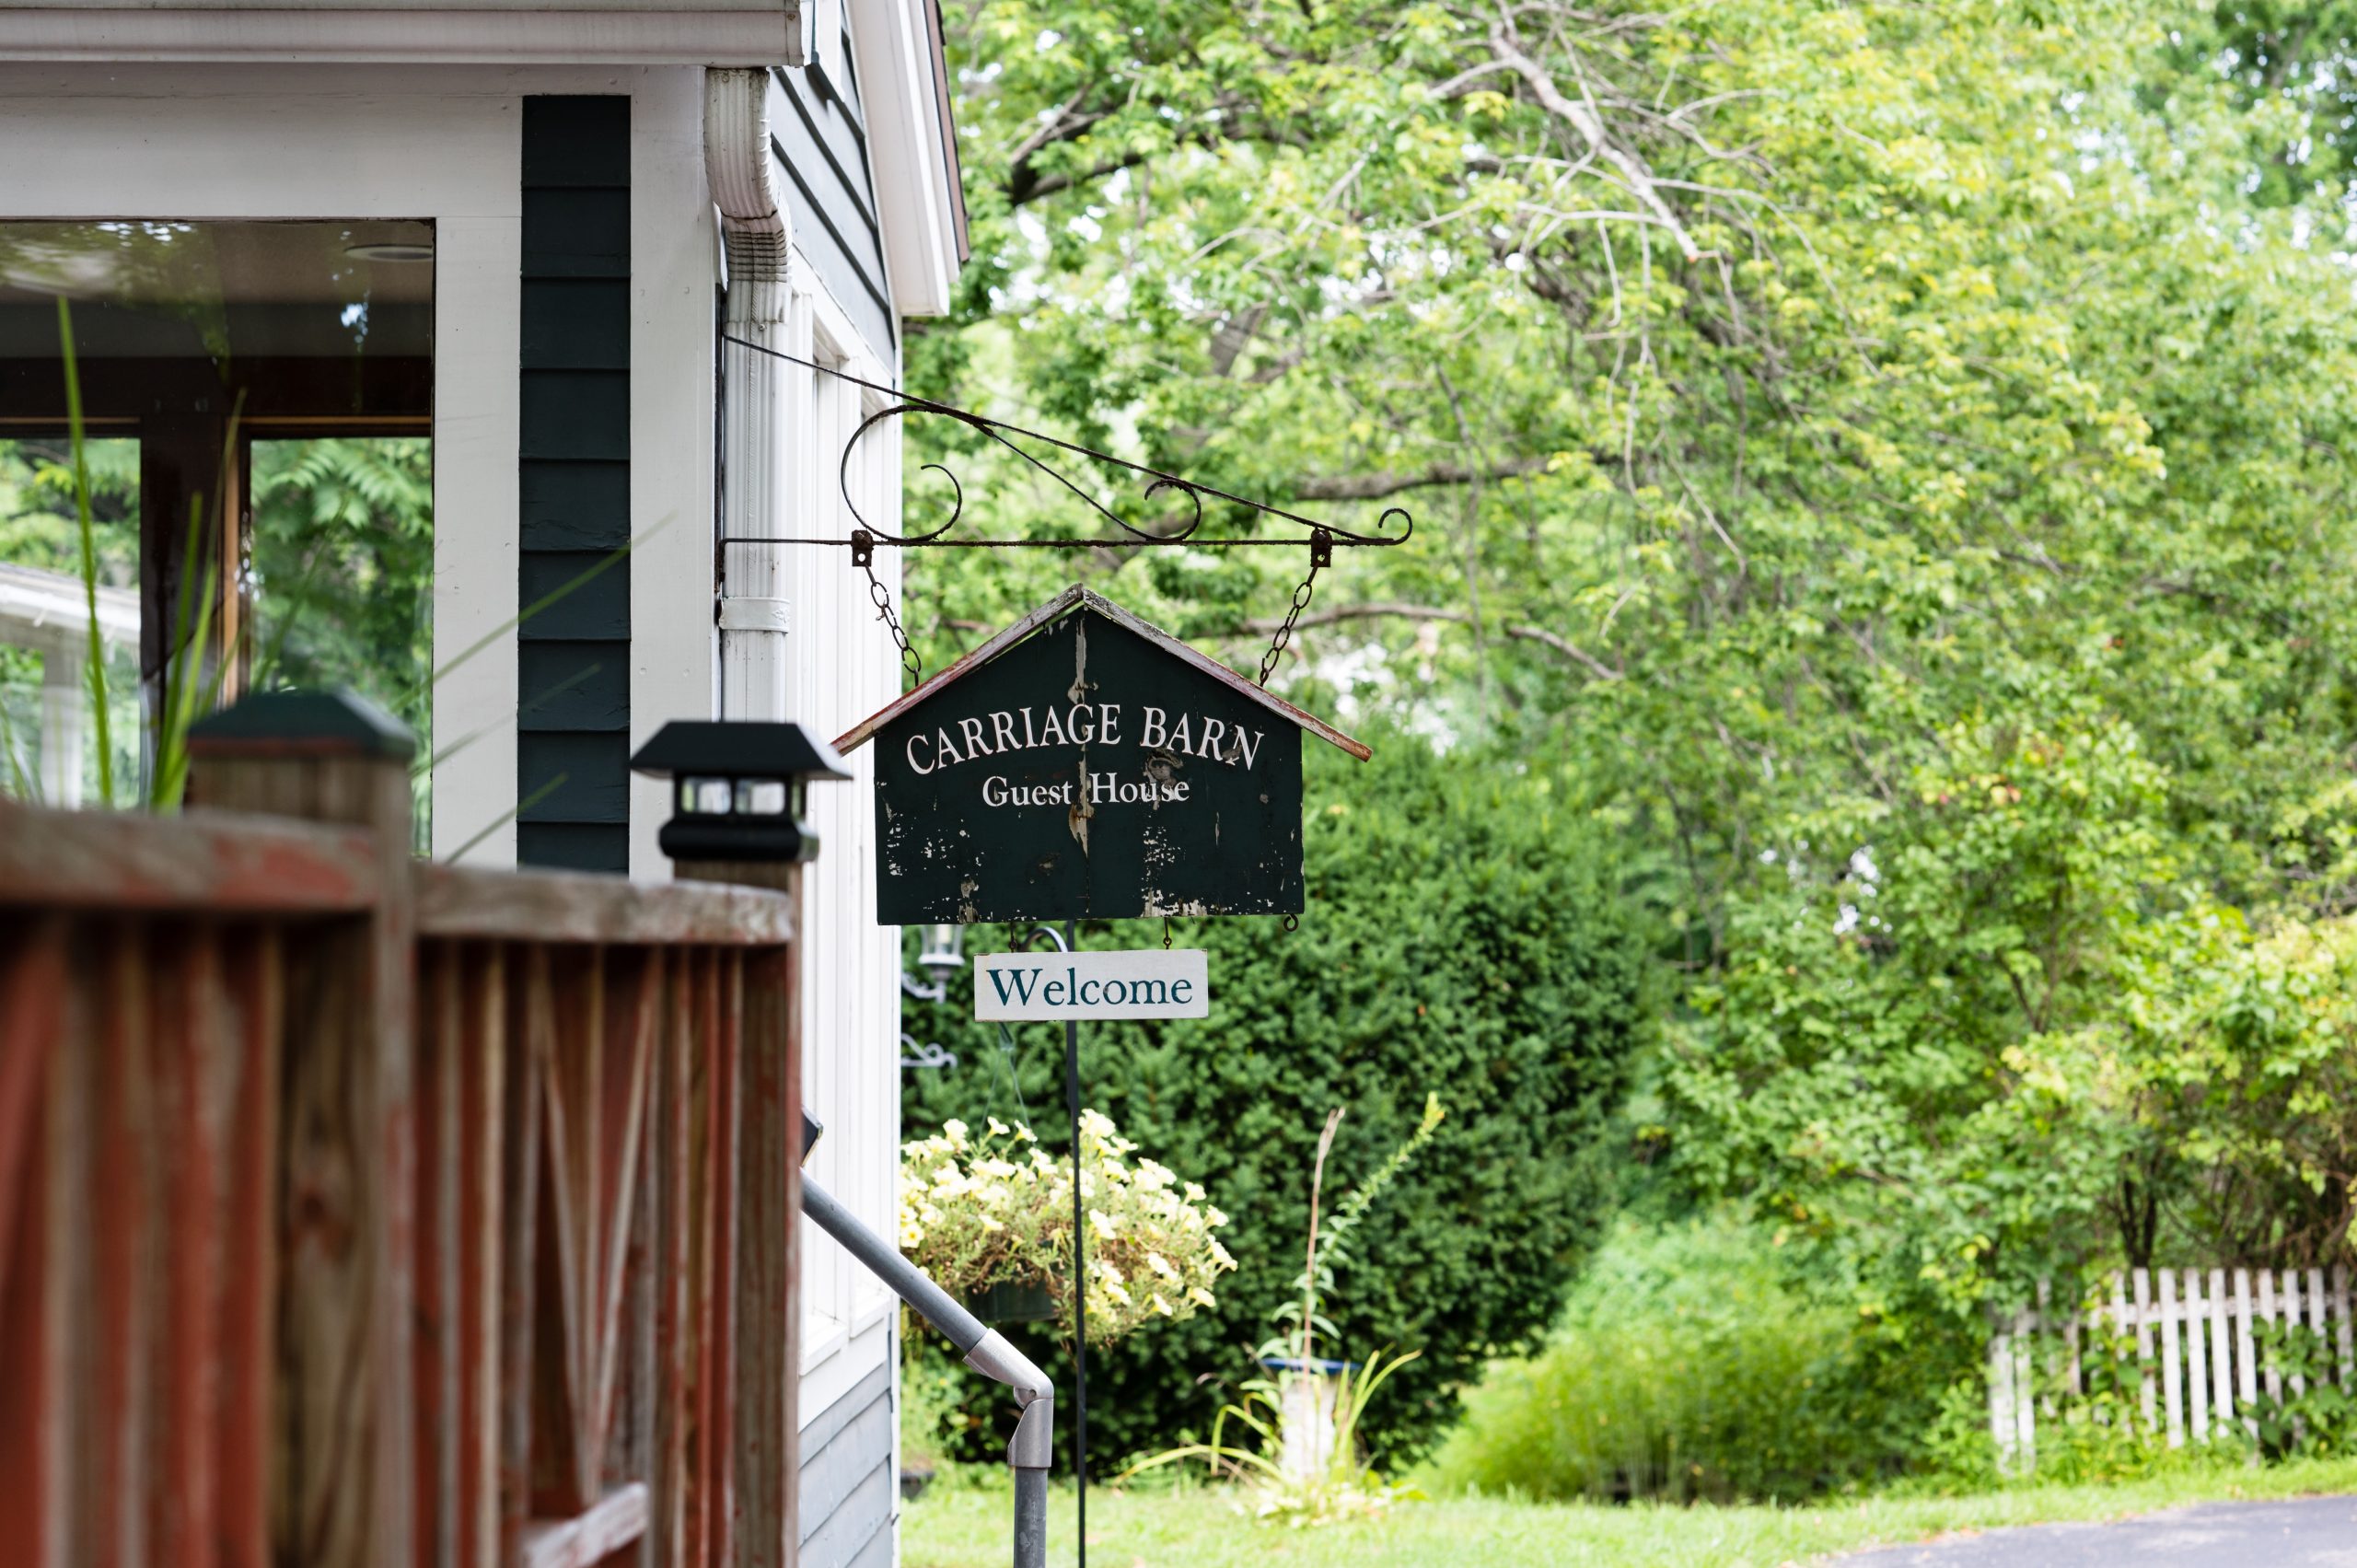 A secondary sign for the Carriage Barn Inn